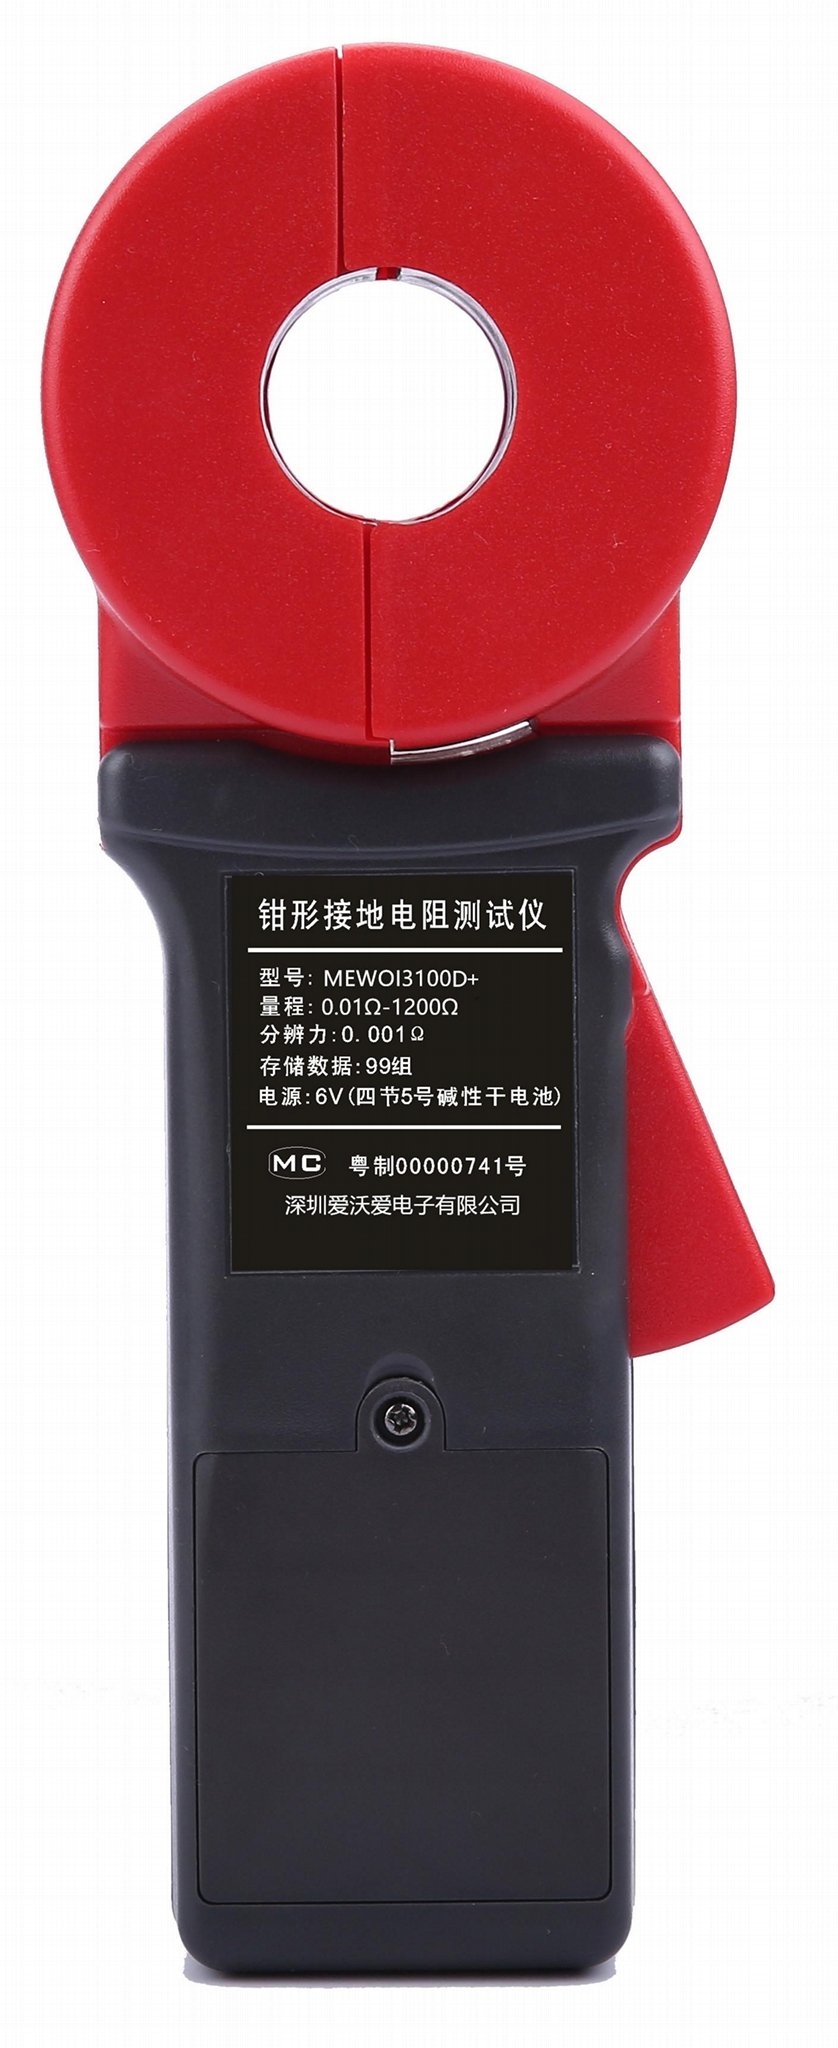 MEWOI3100D+ Clamp on Earth Resistance Tester 2